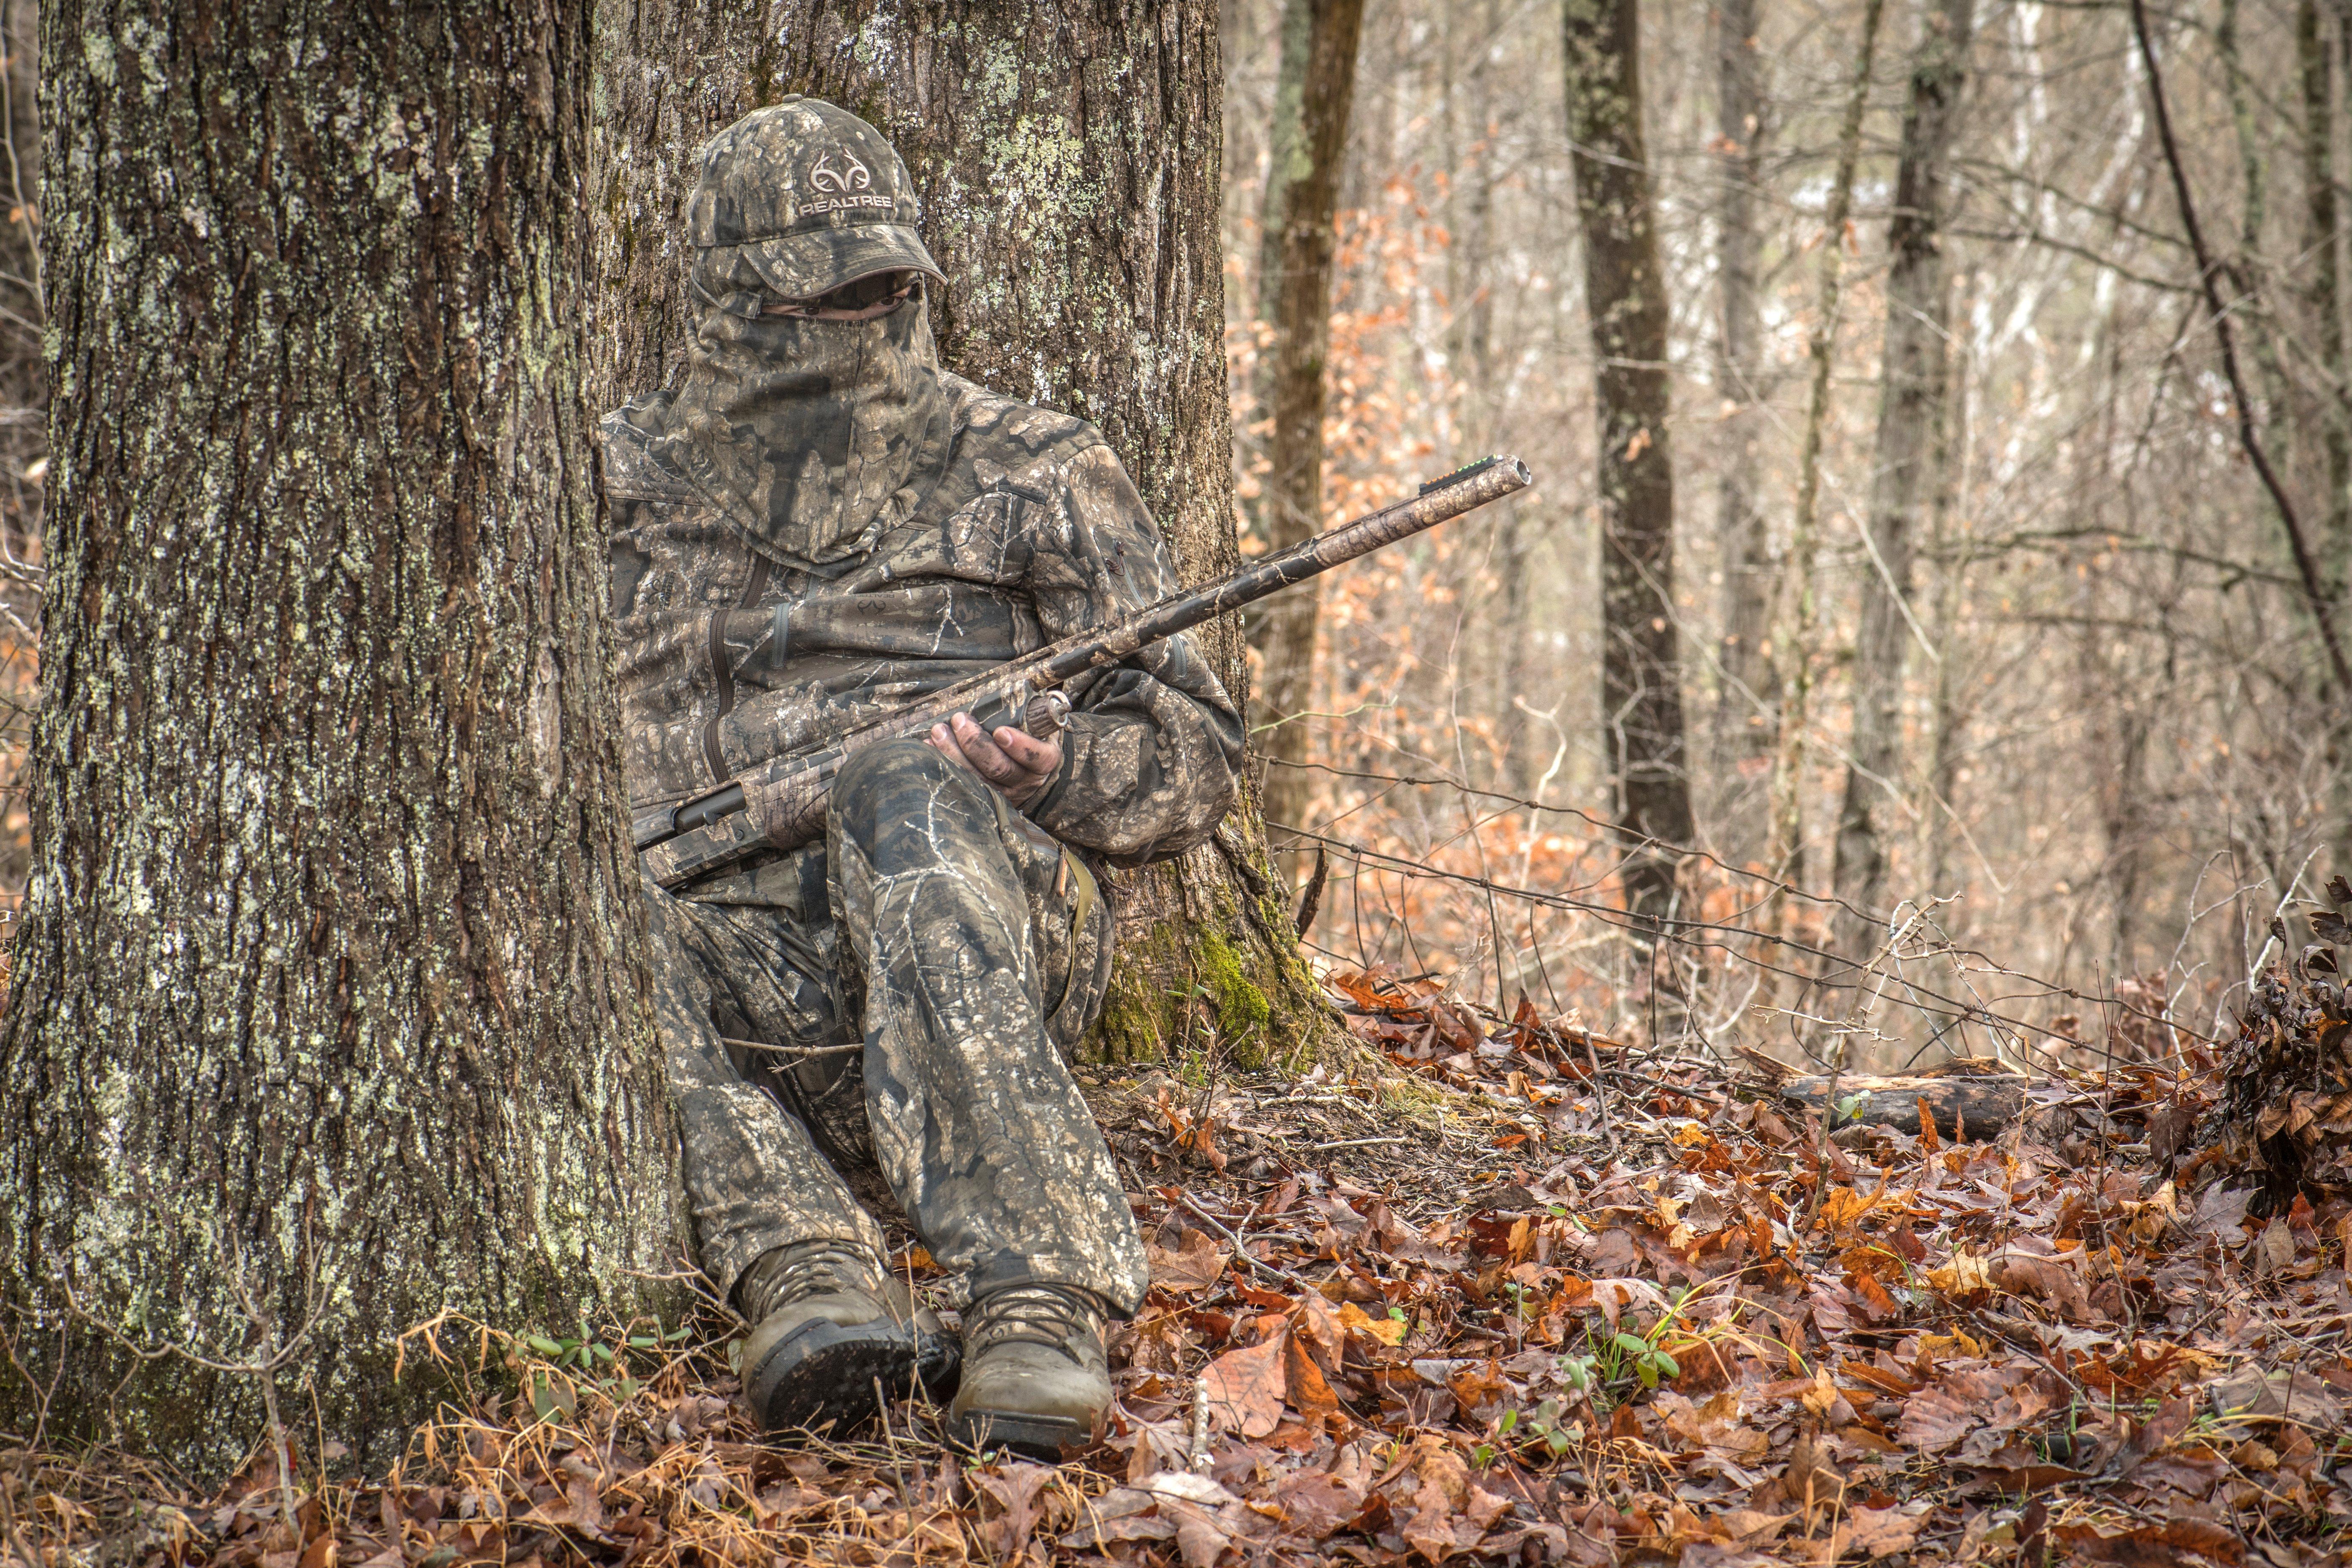 How to Keep Your Butt from Going Numb While Turkey Hunting - Realtree Store